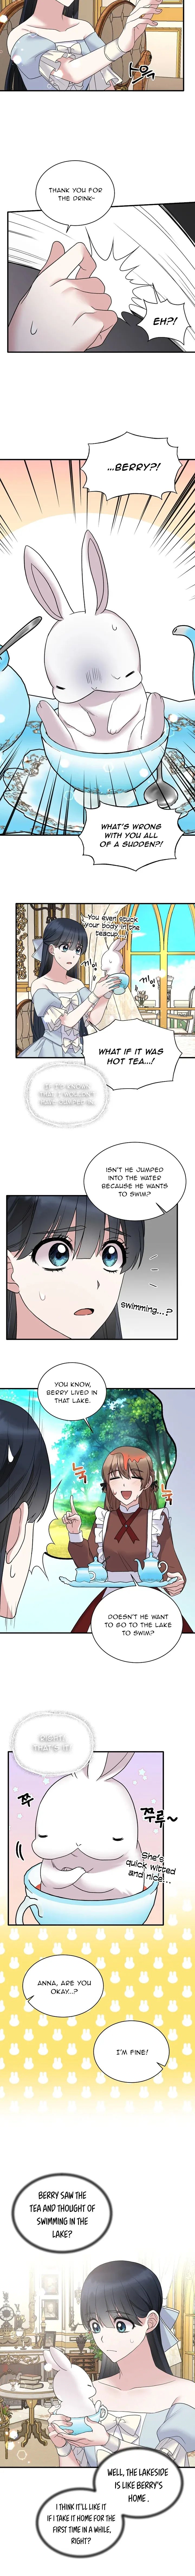 Angel or Villainess chapter 52 - Page 4